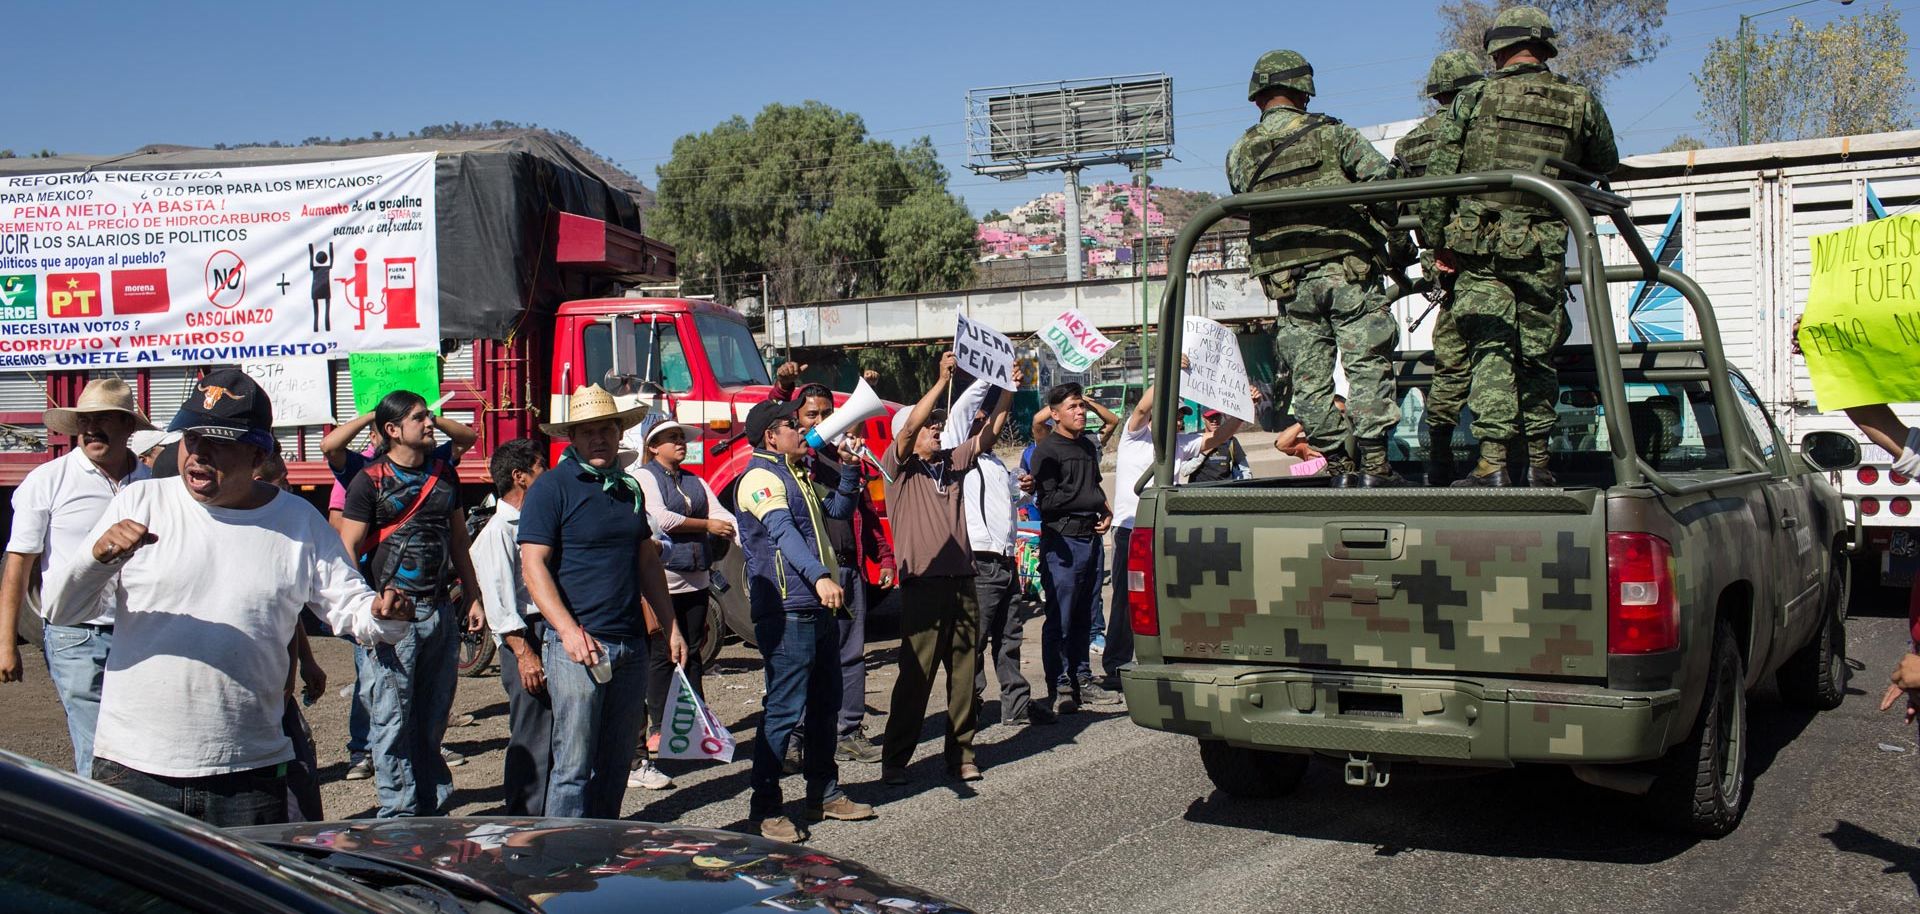 If Fuel Price Protests in Mexico Grow